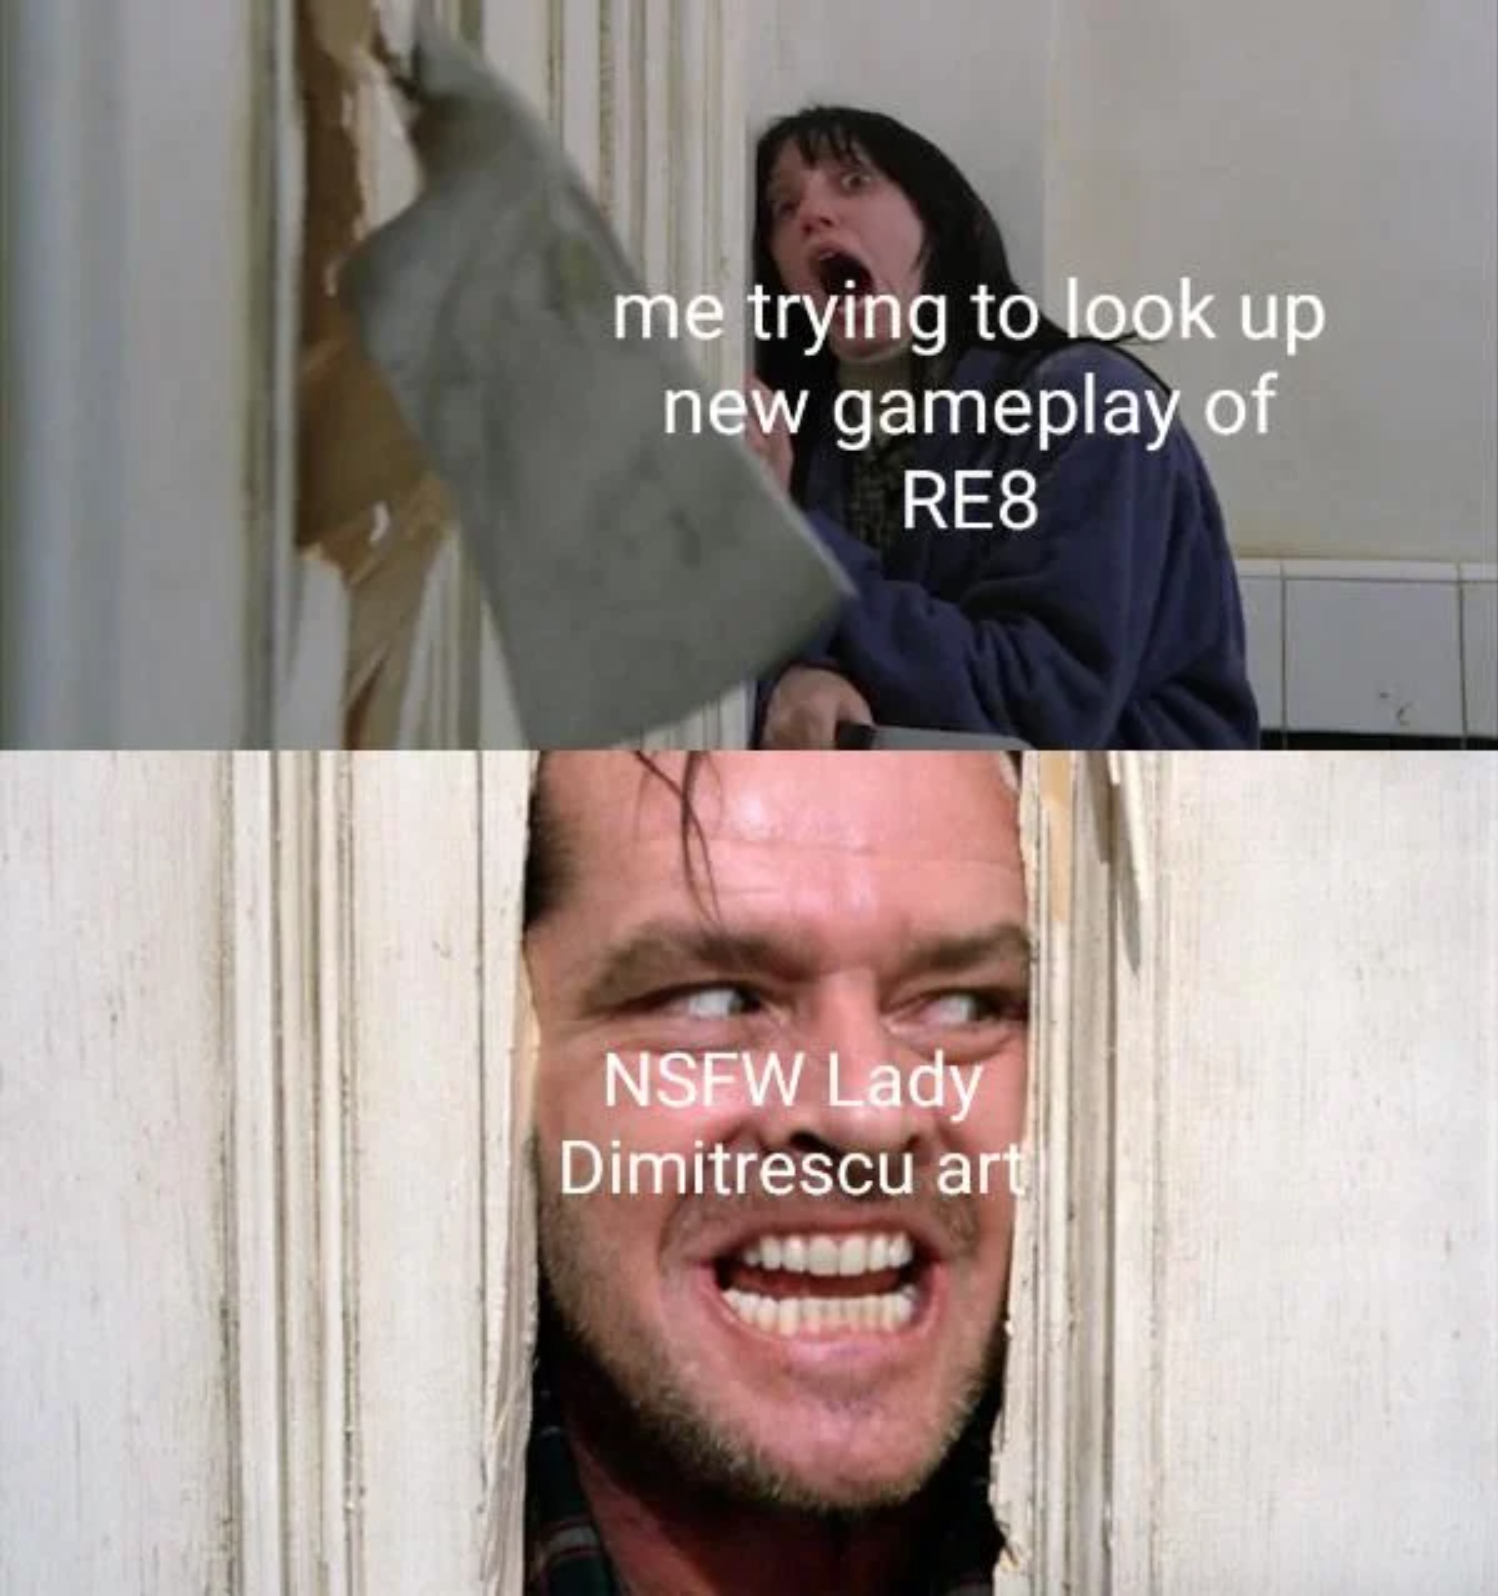 funny gaming memes - shinning meme - me trying to look up new gameplay of RE8 Nsfw Lady Dimitrescu art Sen